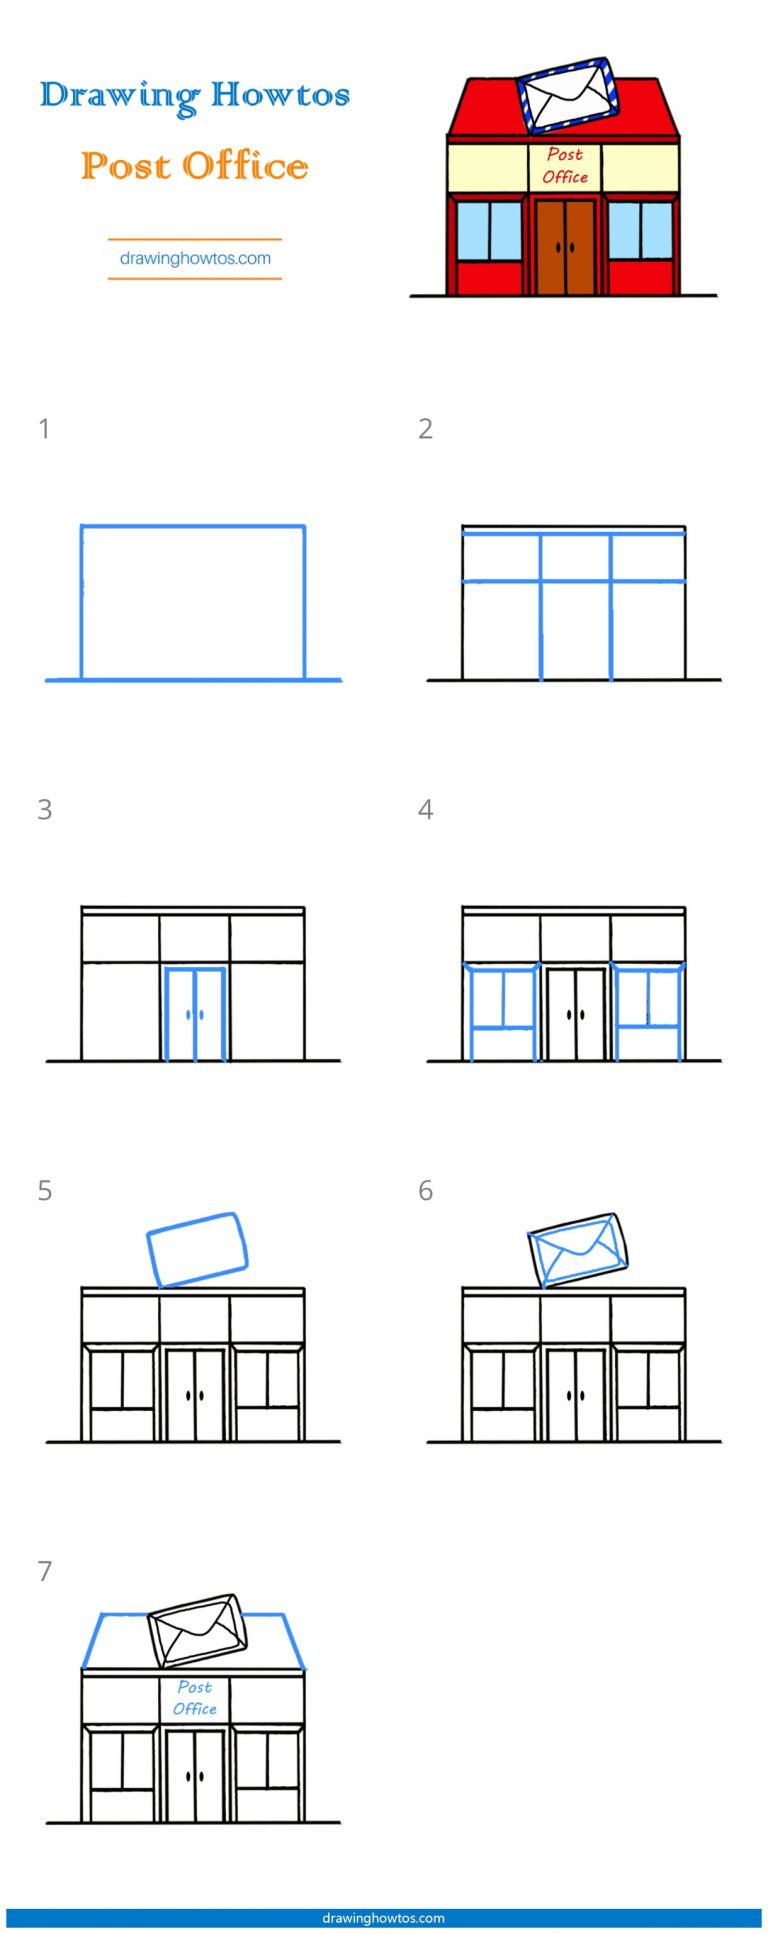 How to Draw a Post Office - Step by Step Easy Drawing Guides - Drawing